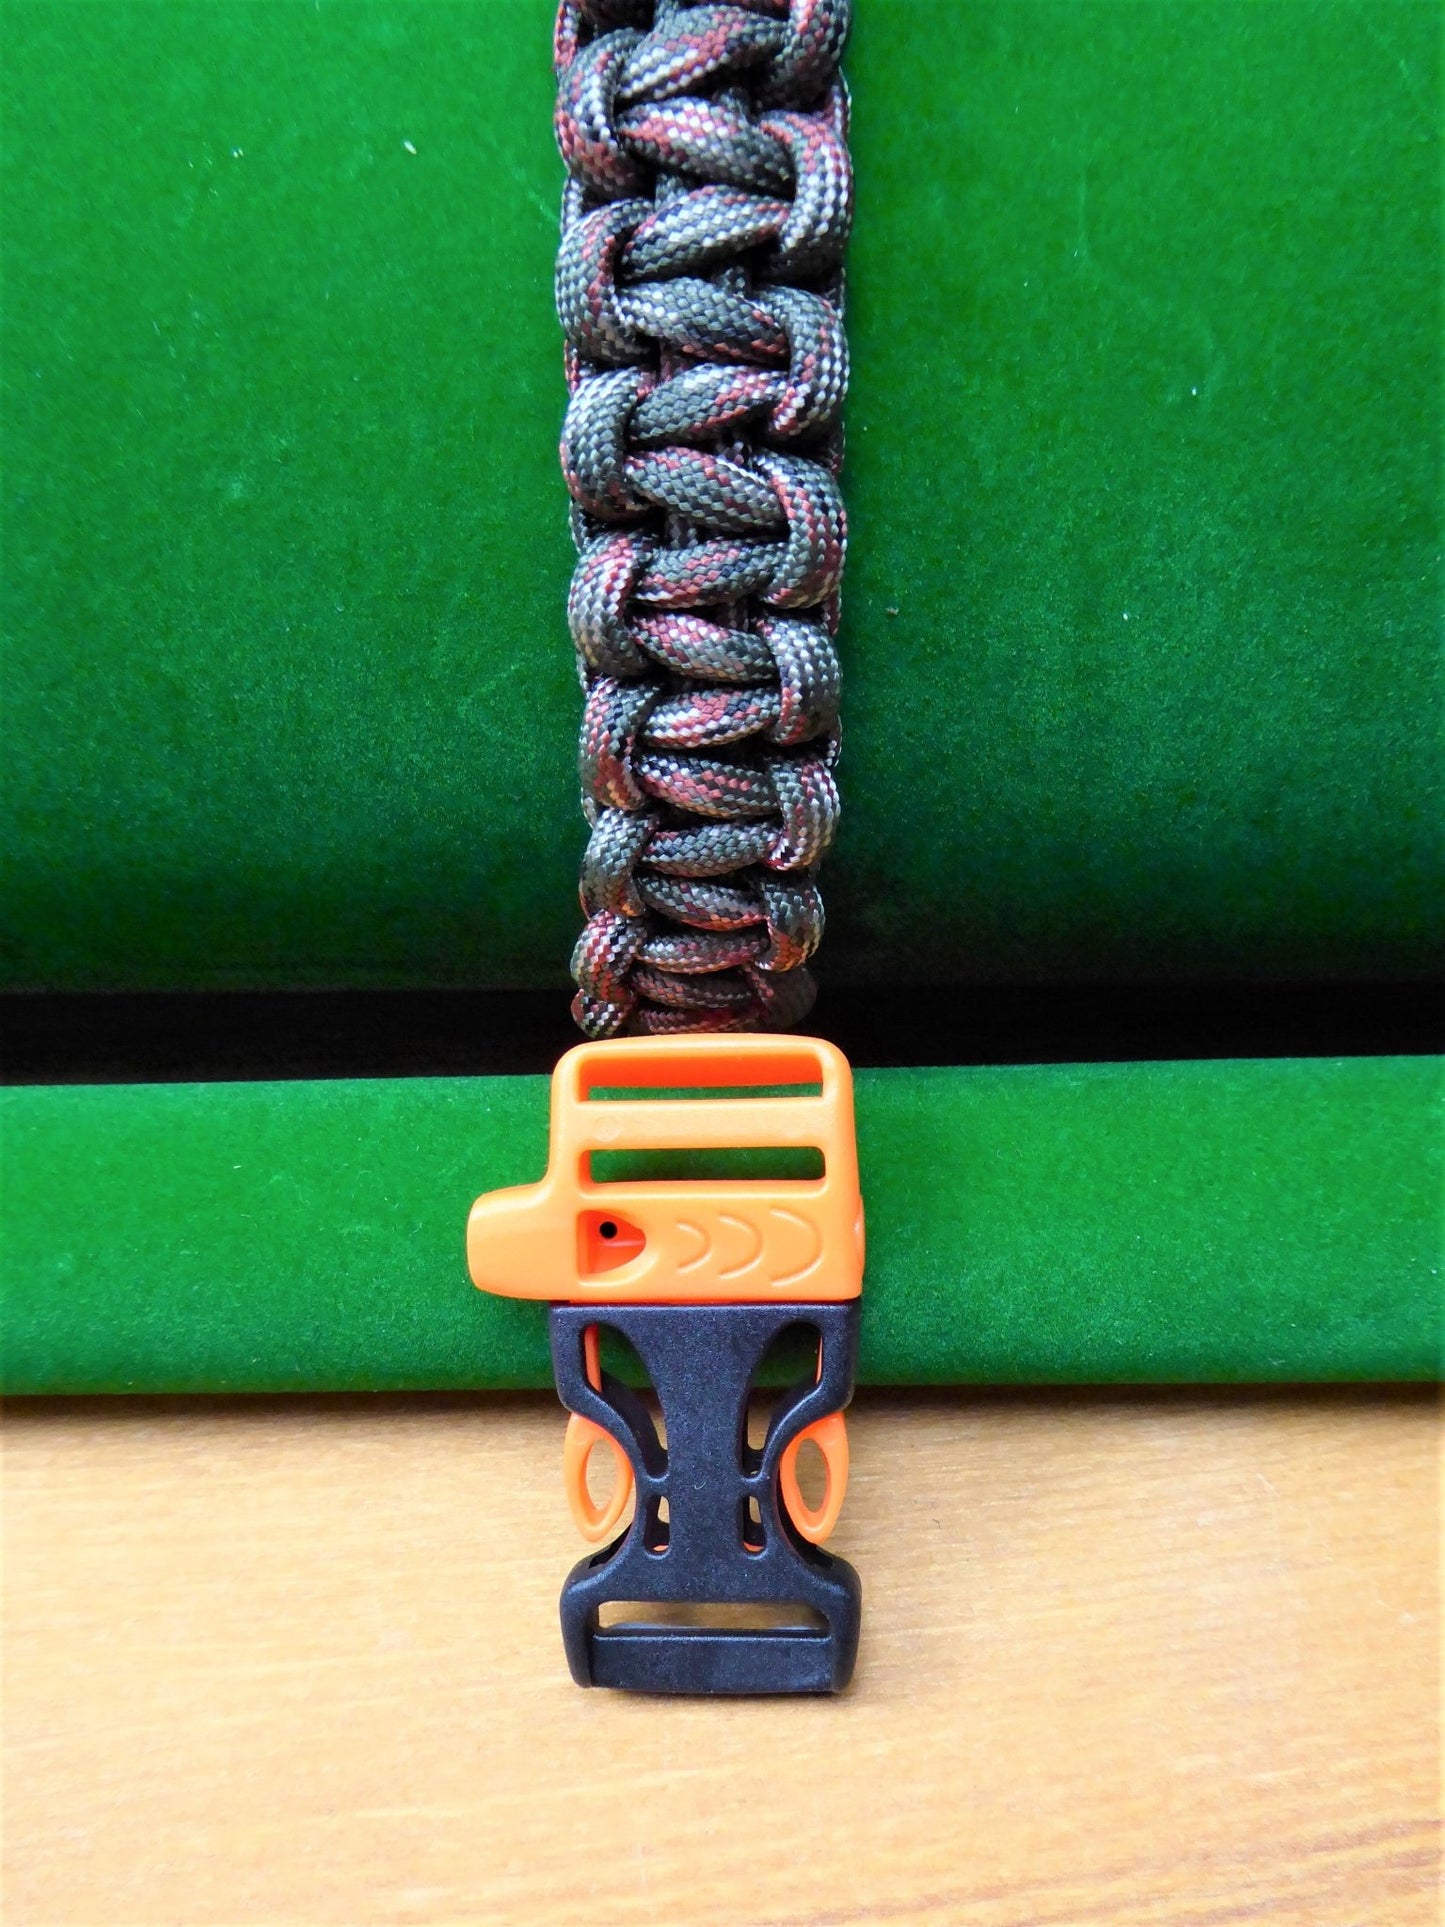 Paracord Buckle Bracelet kits with choice of colours Paracord Huggins Attic Army Camo Black & Orange plastic whistle Buckle  [Huggins attic]